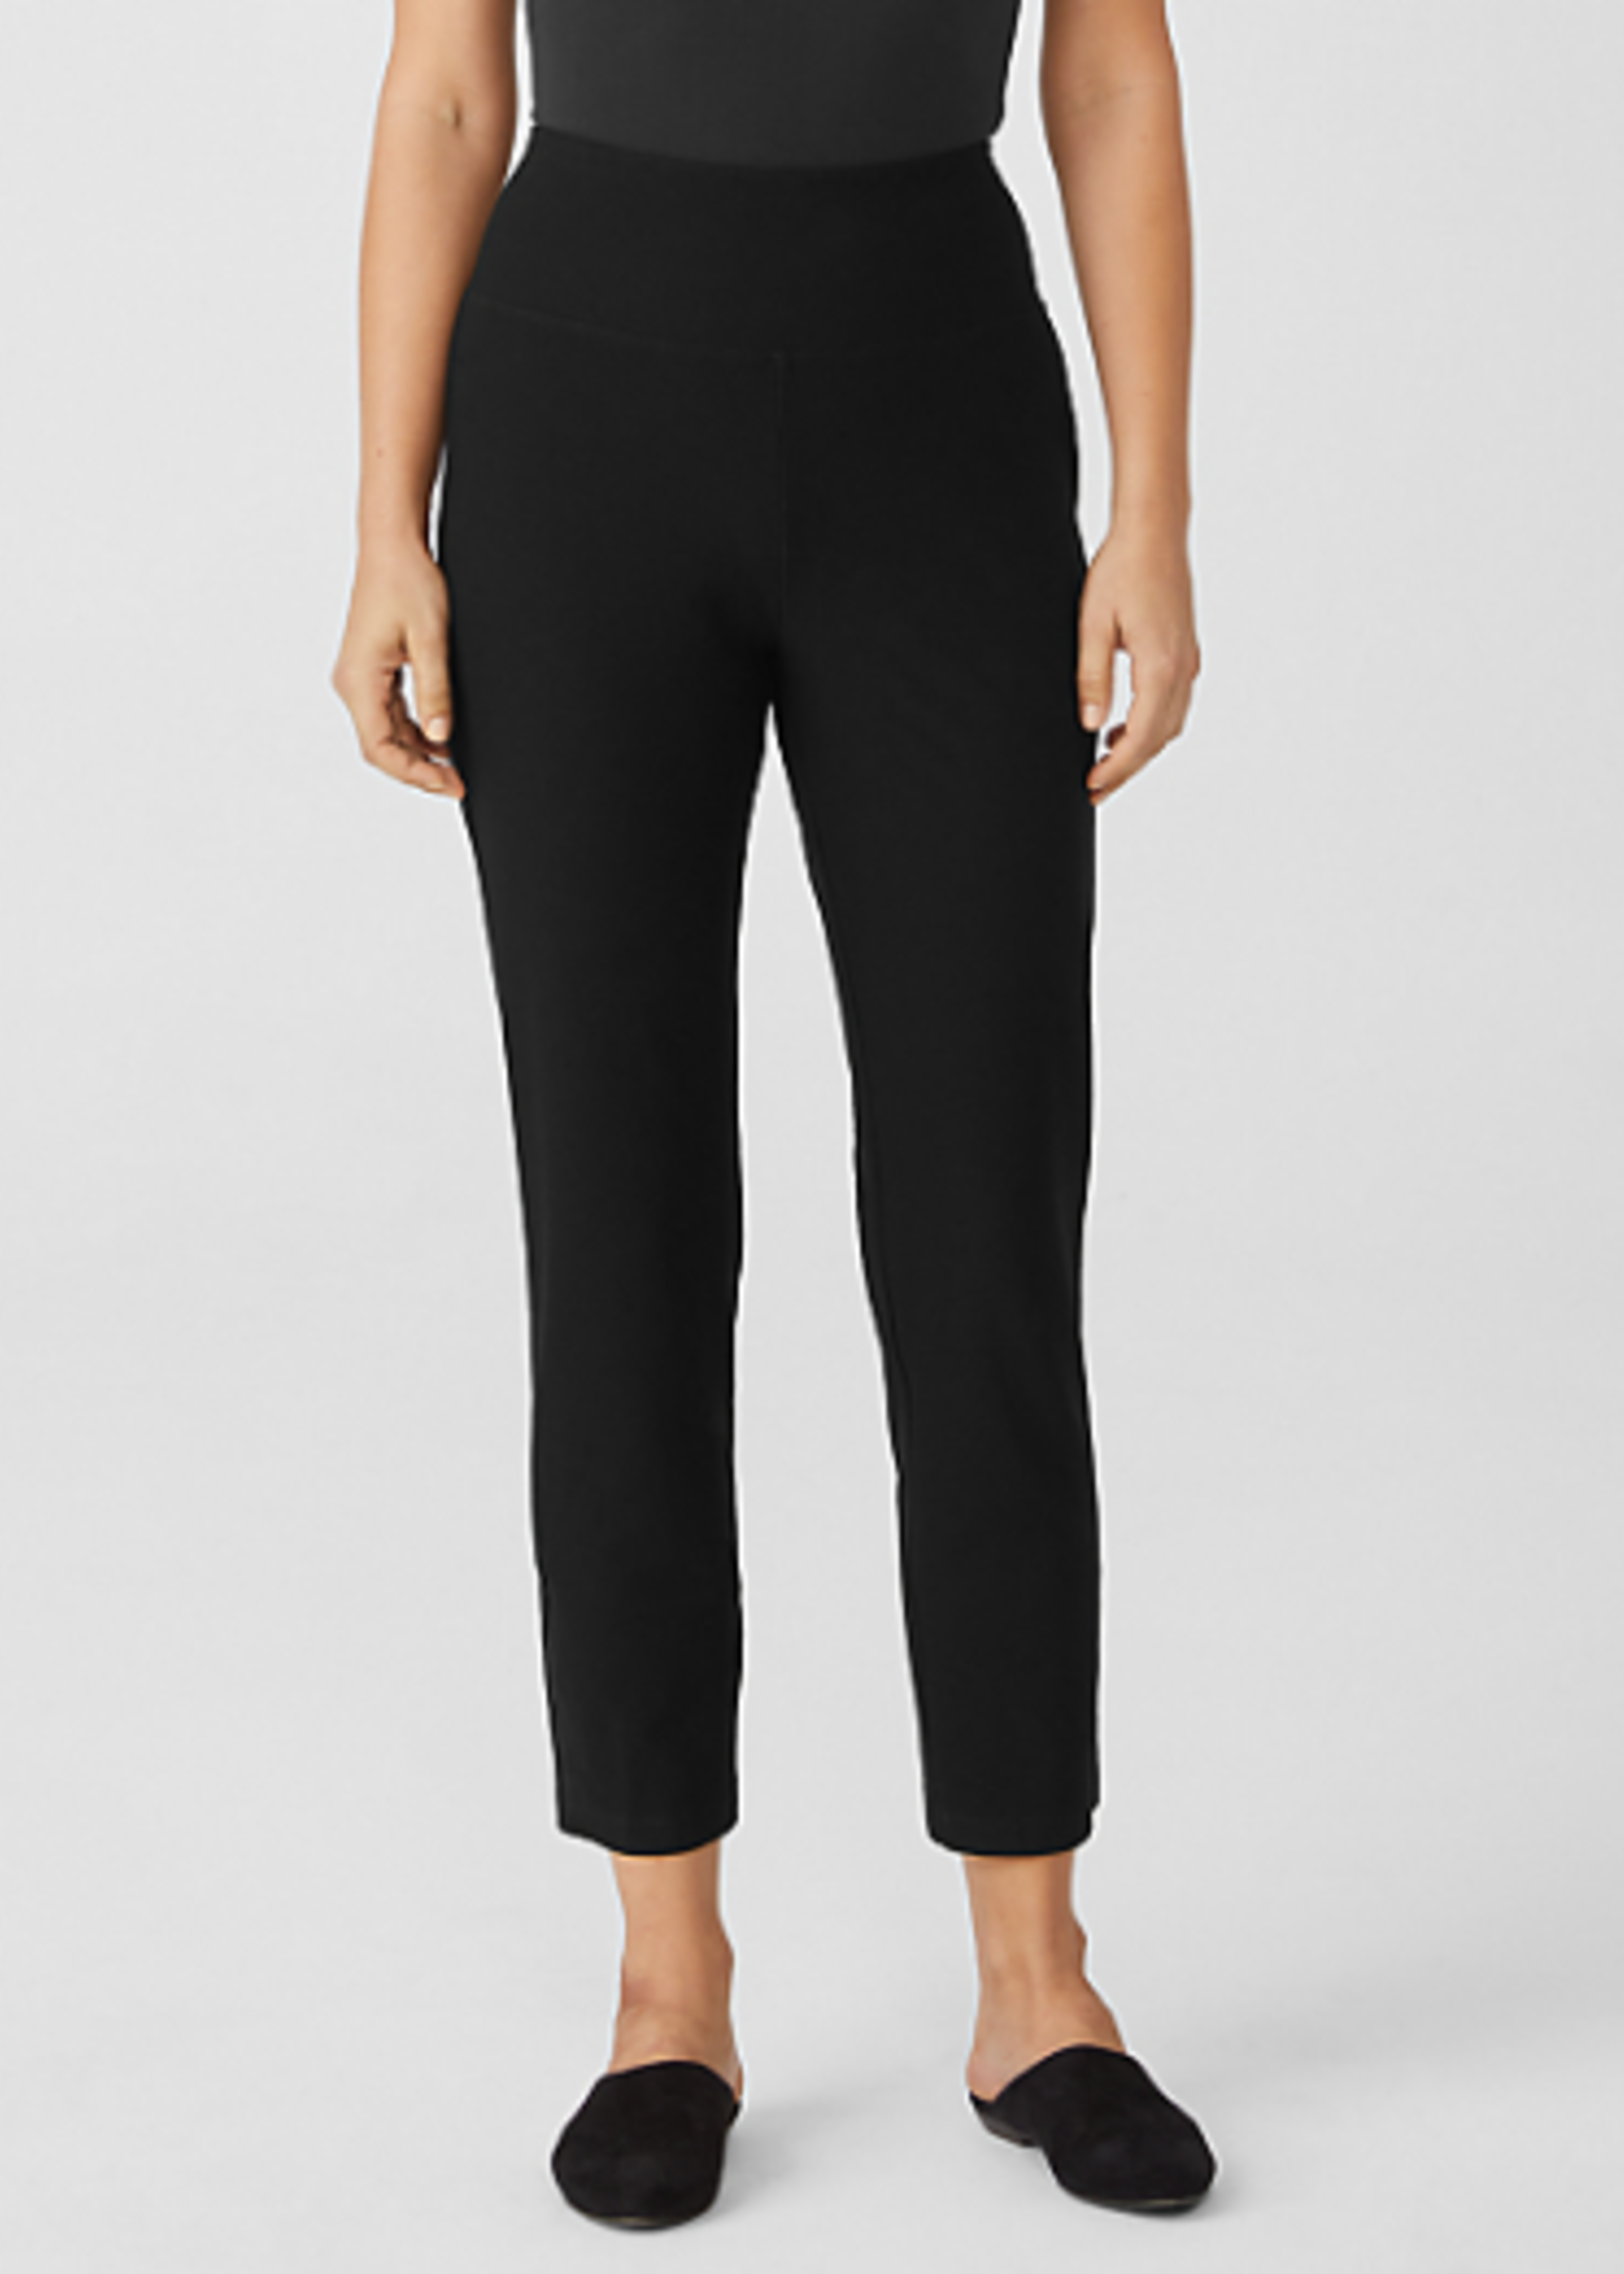 Eileen Fisher Washable Stretch Crepe High-Waisted Pant